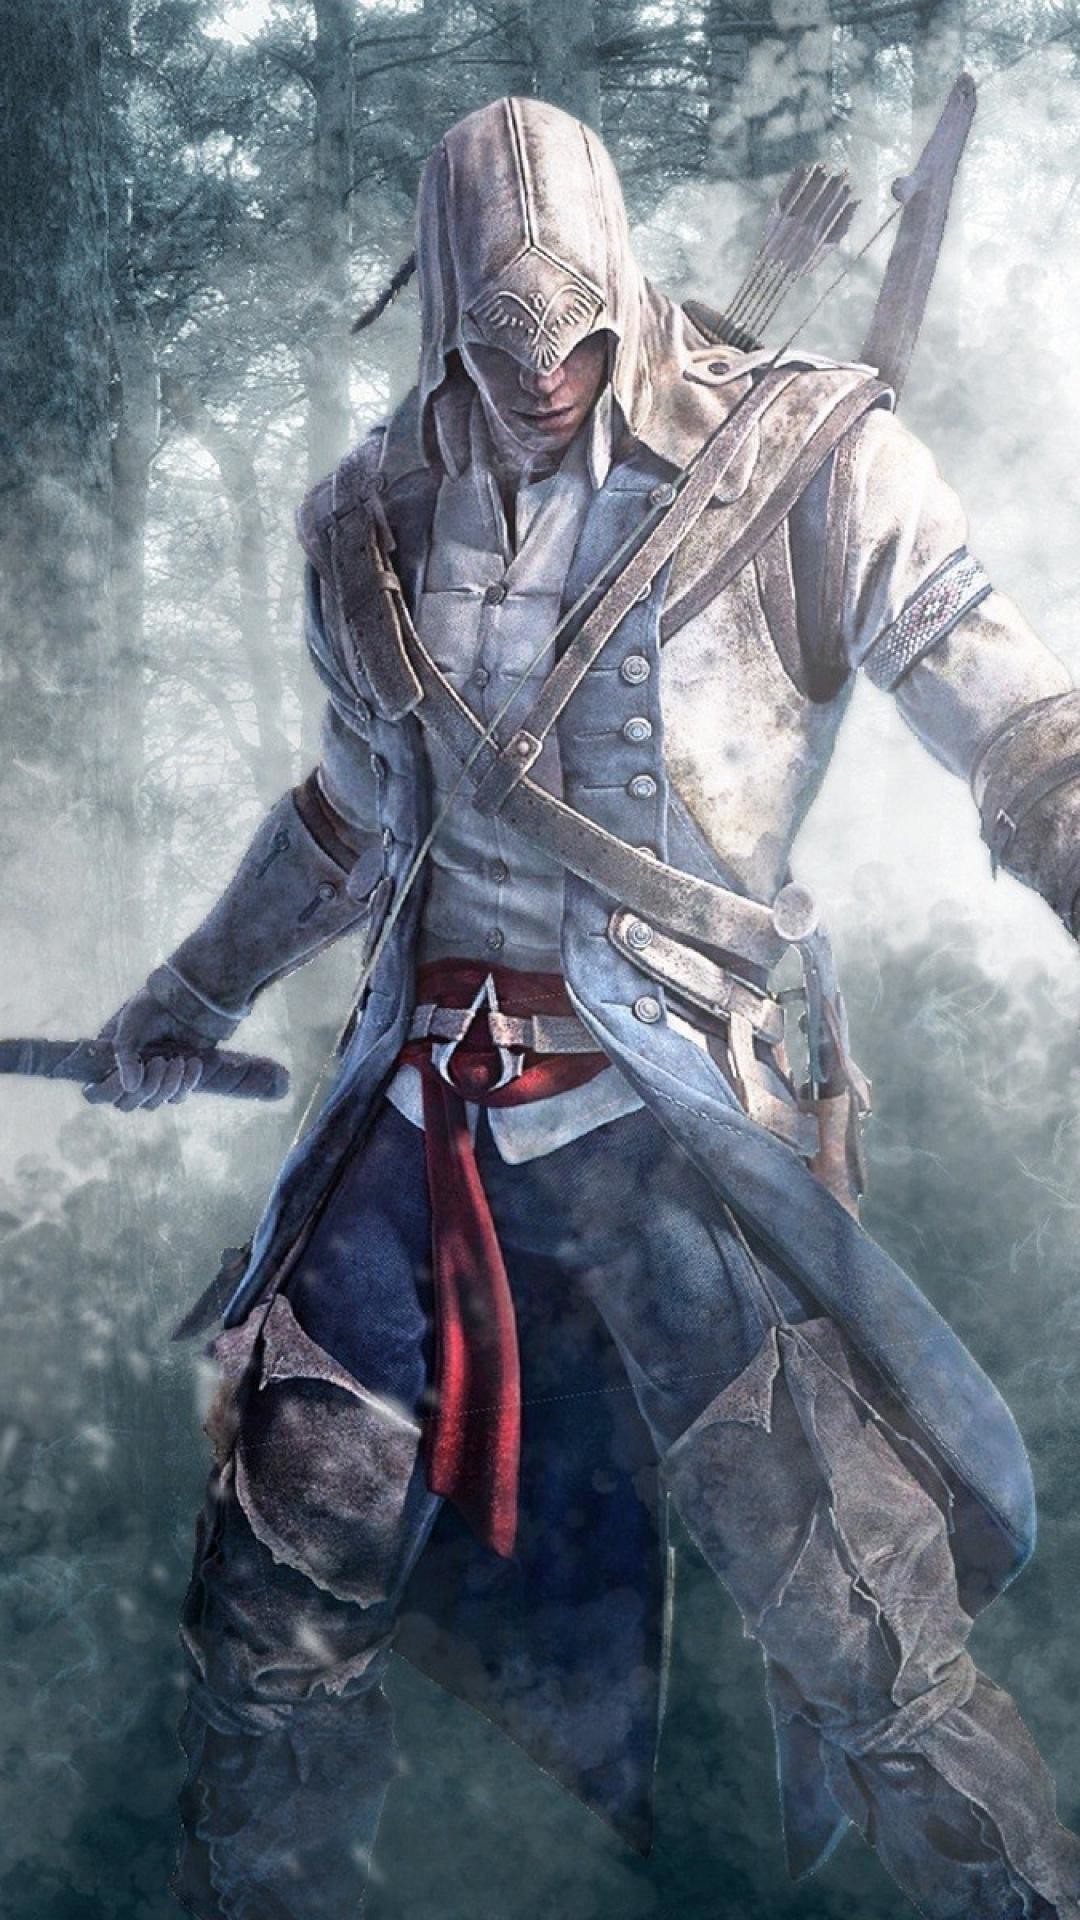 assassins creed wallpaper android,action adventure game,cg artwork,illustration,games,adventure game